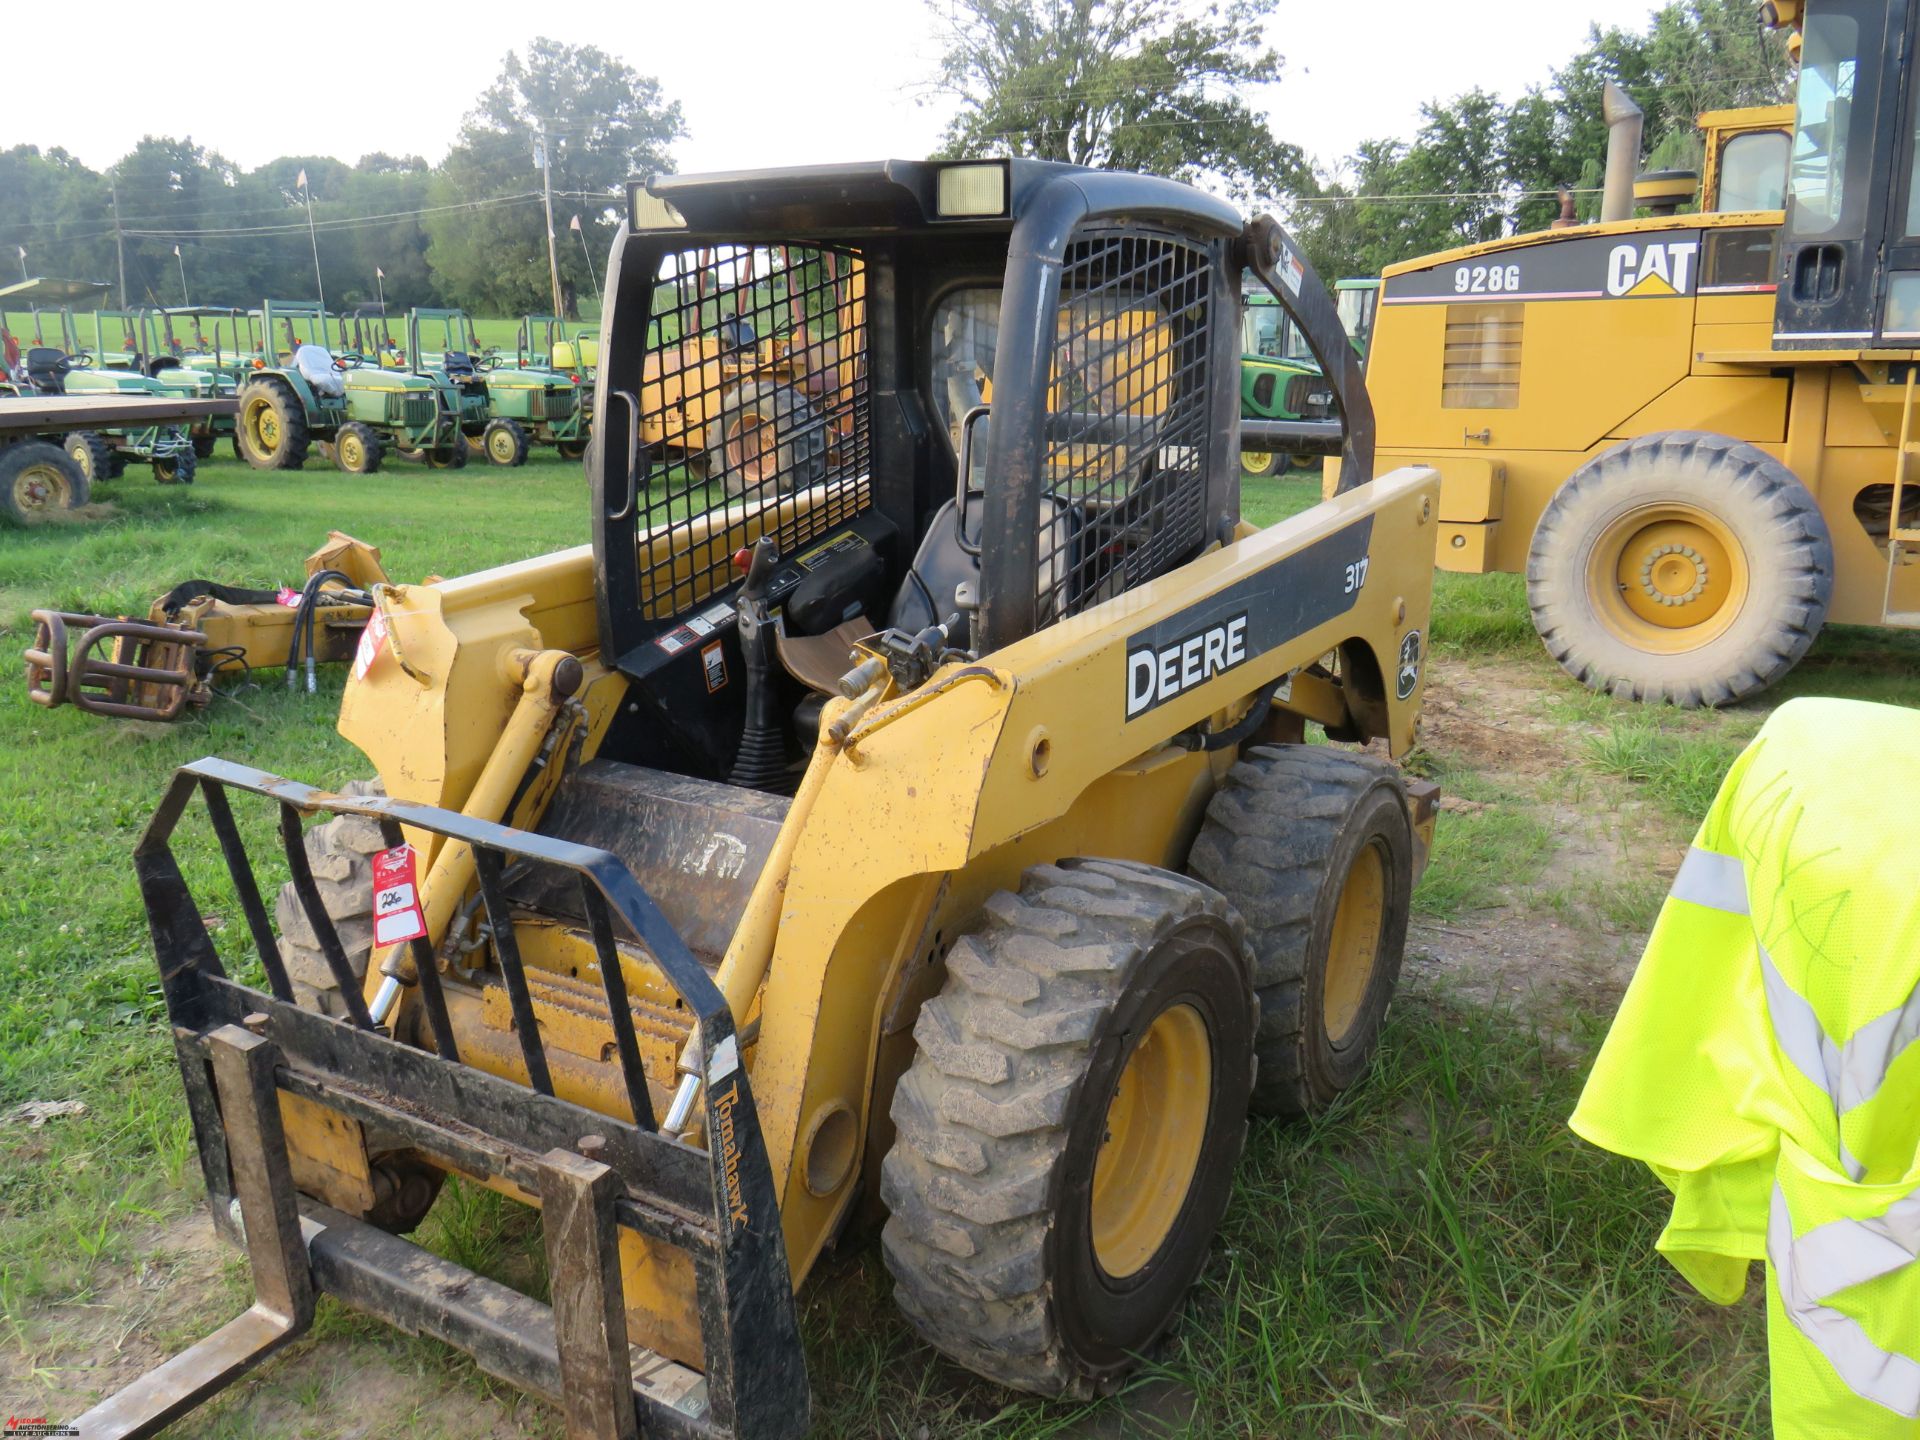 JOHN DEERE 317 RUBBER TIRE SKID STEER, AUXILIARY HYDRAULICS, 12-16.5 TIRES, REAR WEIGHTS, 2972 HOURS - Image 4 of 6